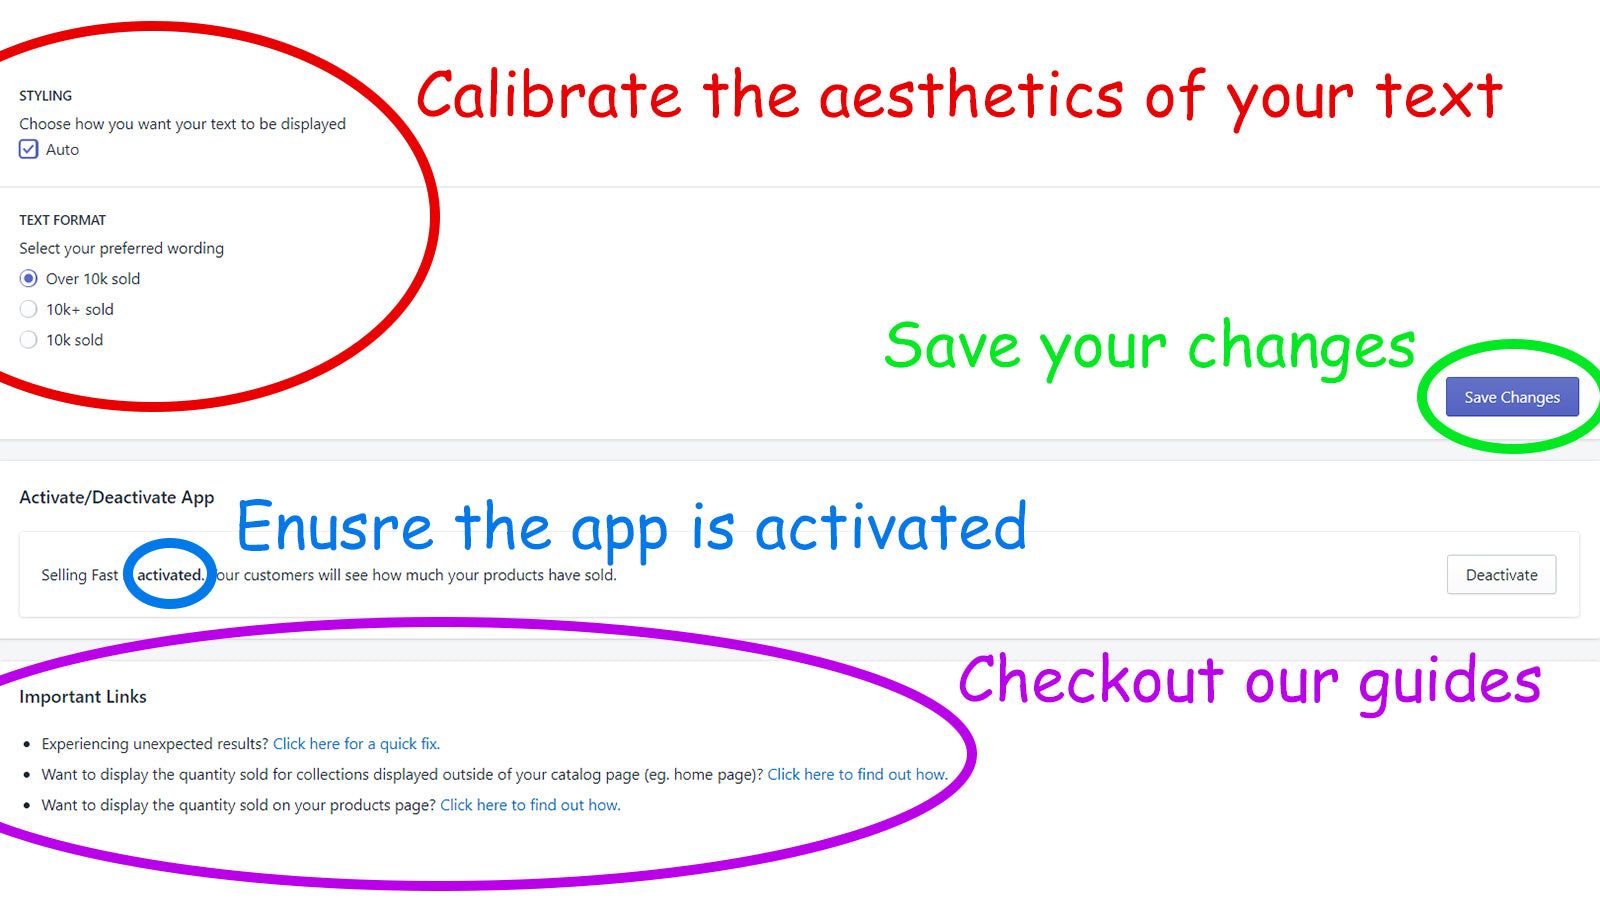 Calibrate aesthetics, activate app and save